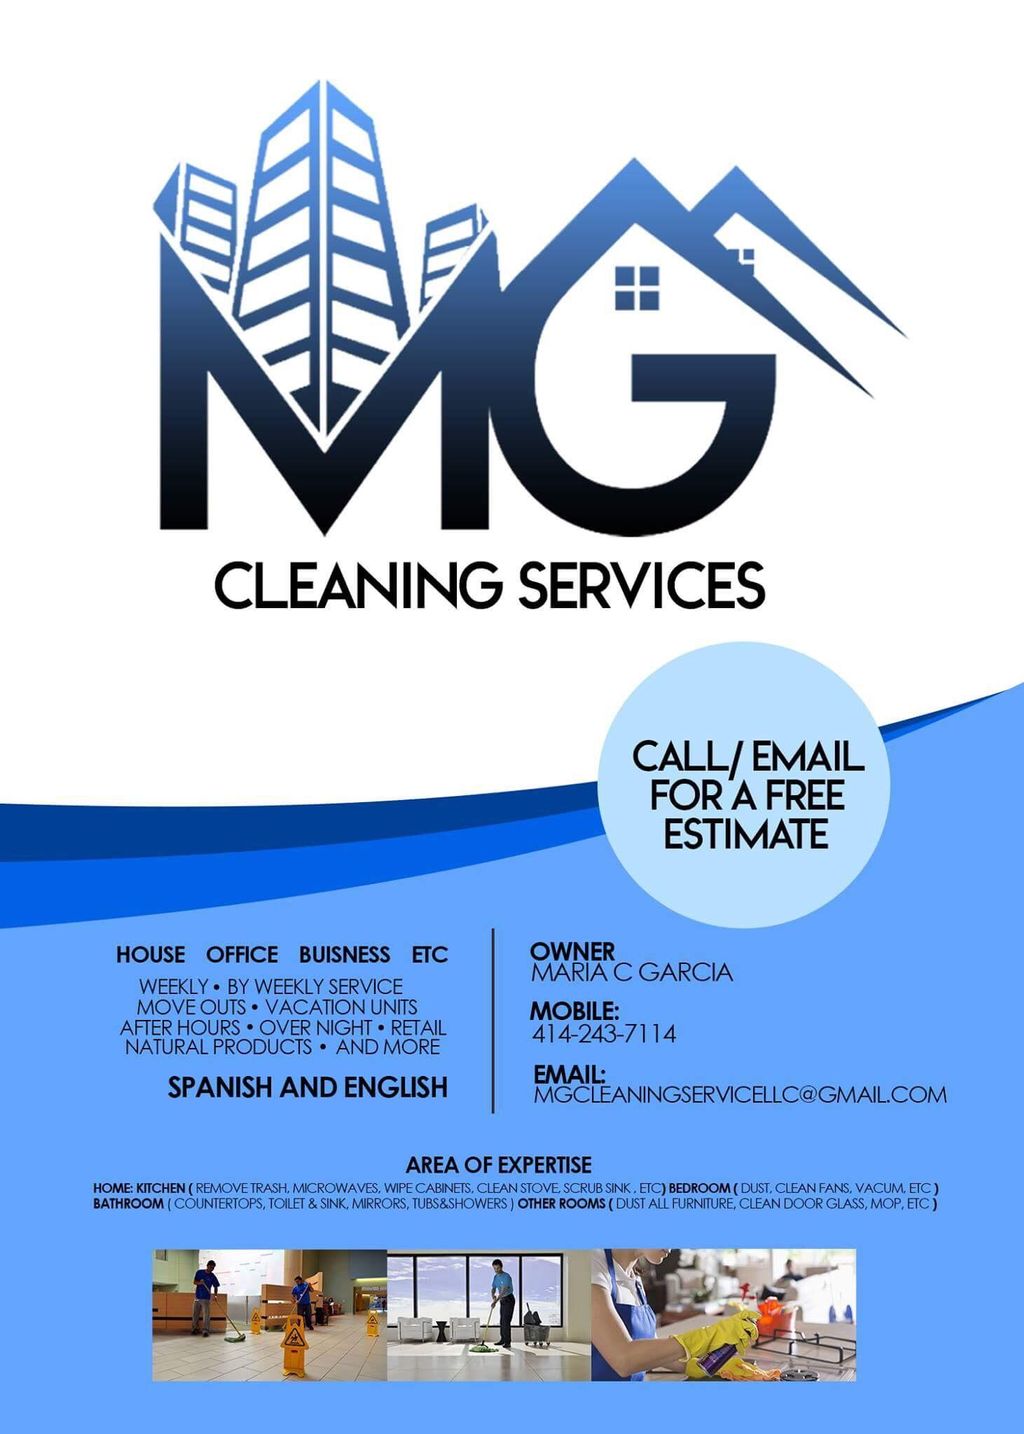 MG cleaning services Llc